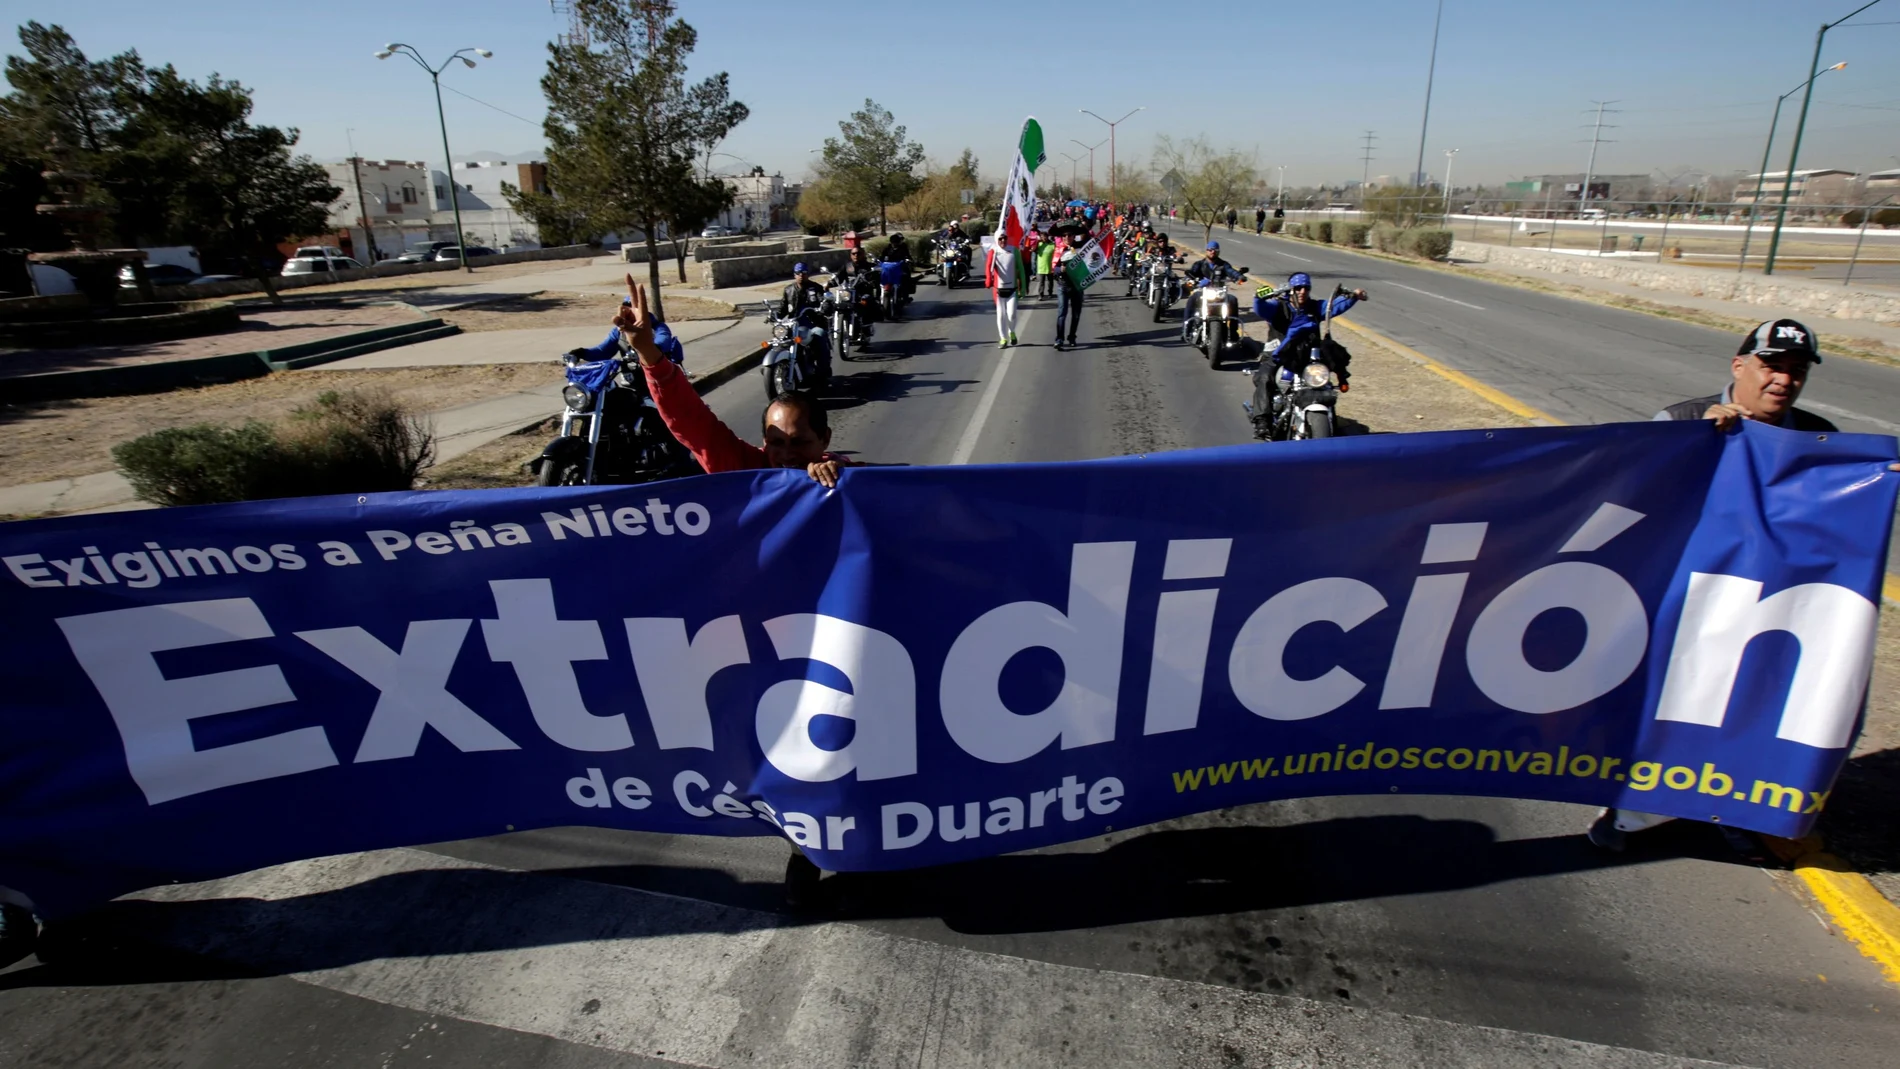 FILE PHOTO: People hold a banner as they take part in the 'March for Dignity' from the border city of Ciudad Juarez to the Finance Minister's premises in Mexico City